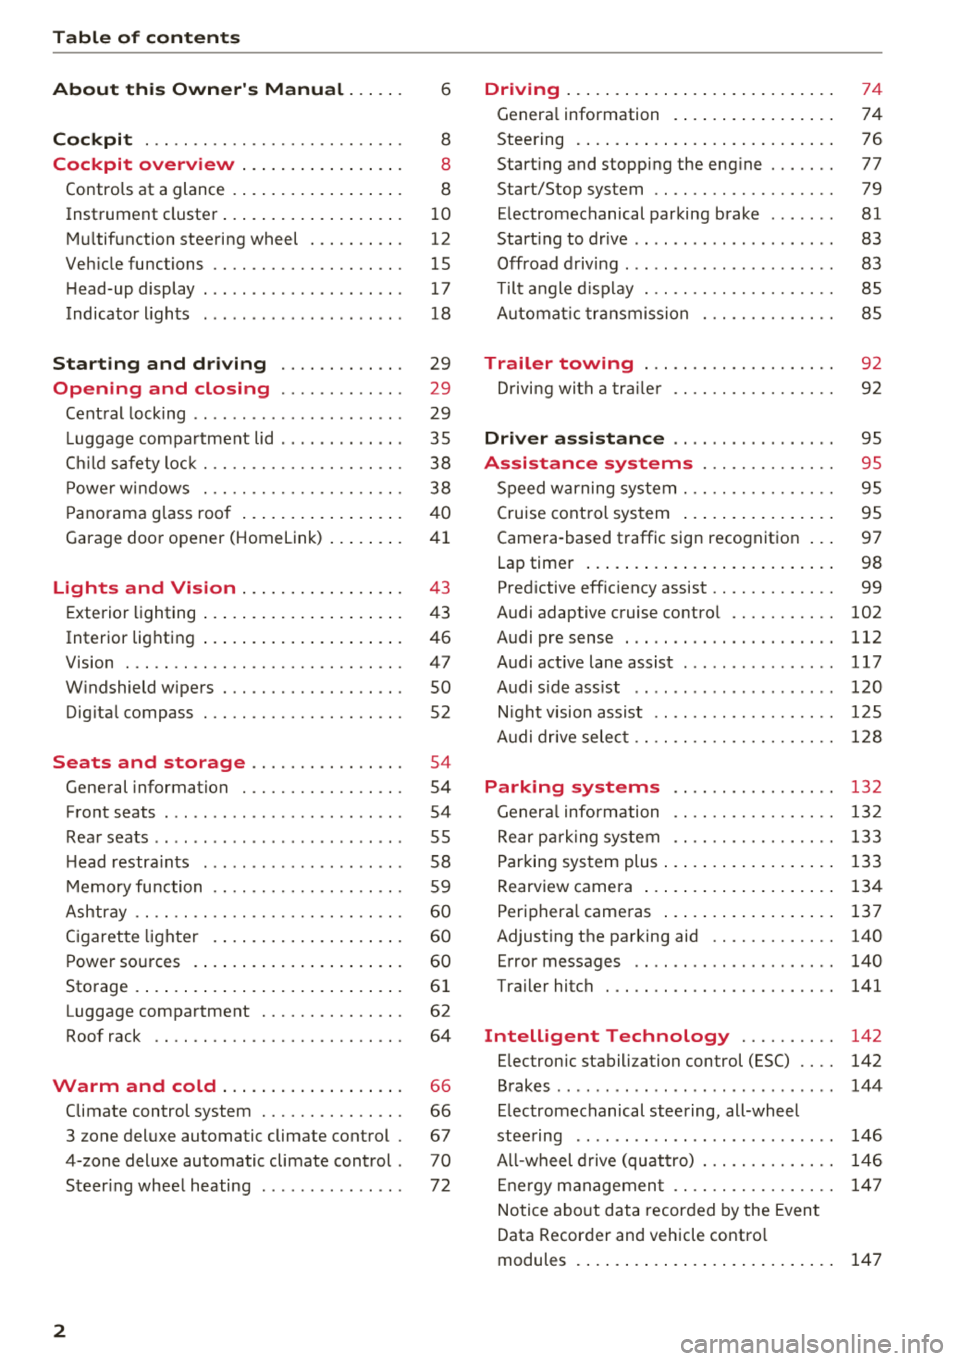 AUDI Q7 2018  Owner´s Manual Table of  contents 
About  this  Owners  Manual.  . .  . . . 
6 
Cockpit  . . .  . .  . . . . . . . . . . . . . . .  . . . .  . .  . 8 
Cockpit  overview  . .  . . . . .  . . .  . .  . .  . . . 8 
Co